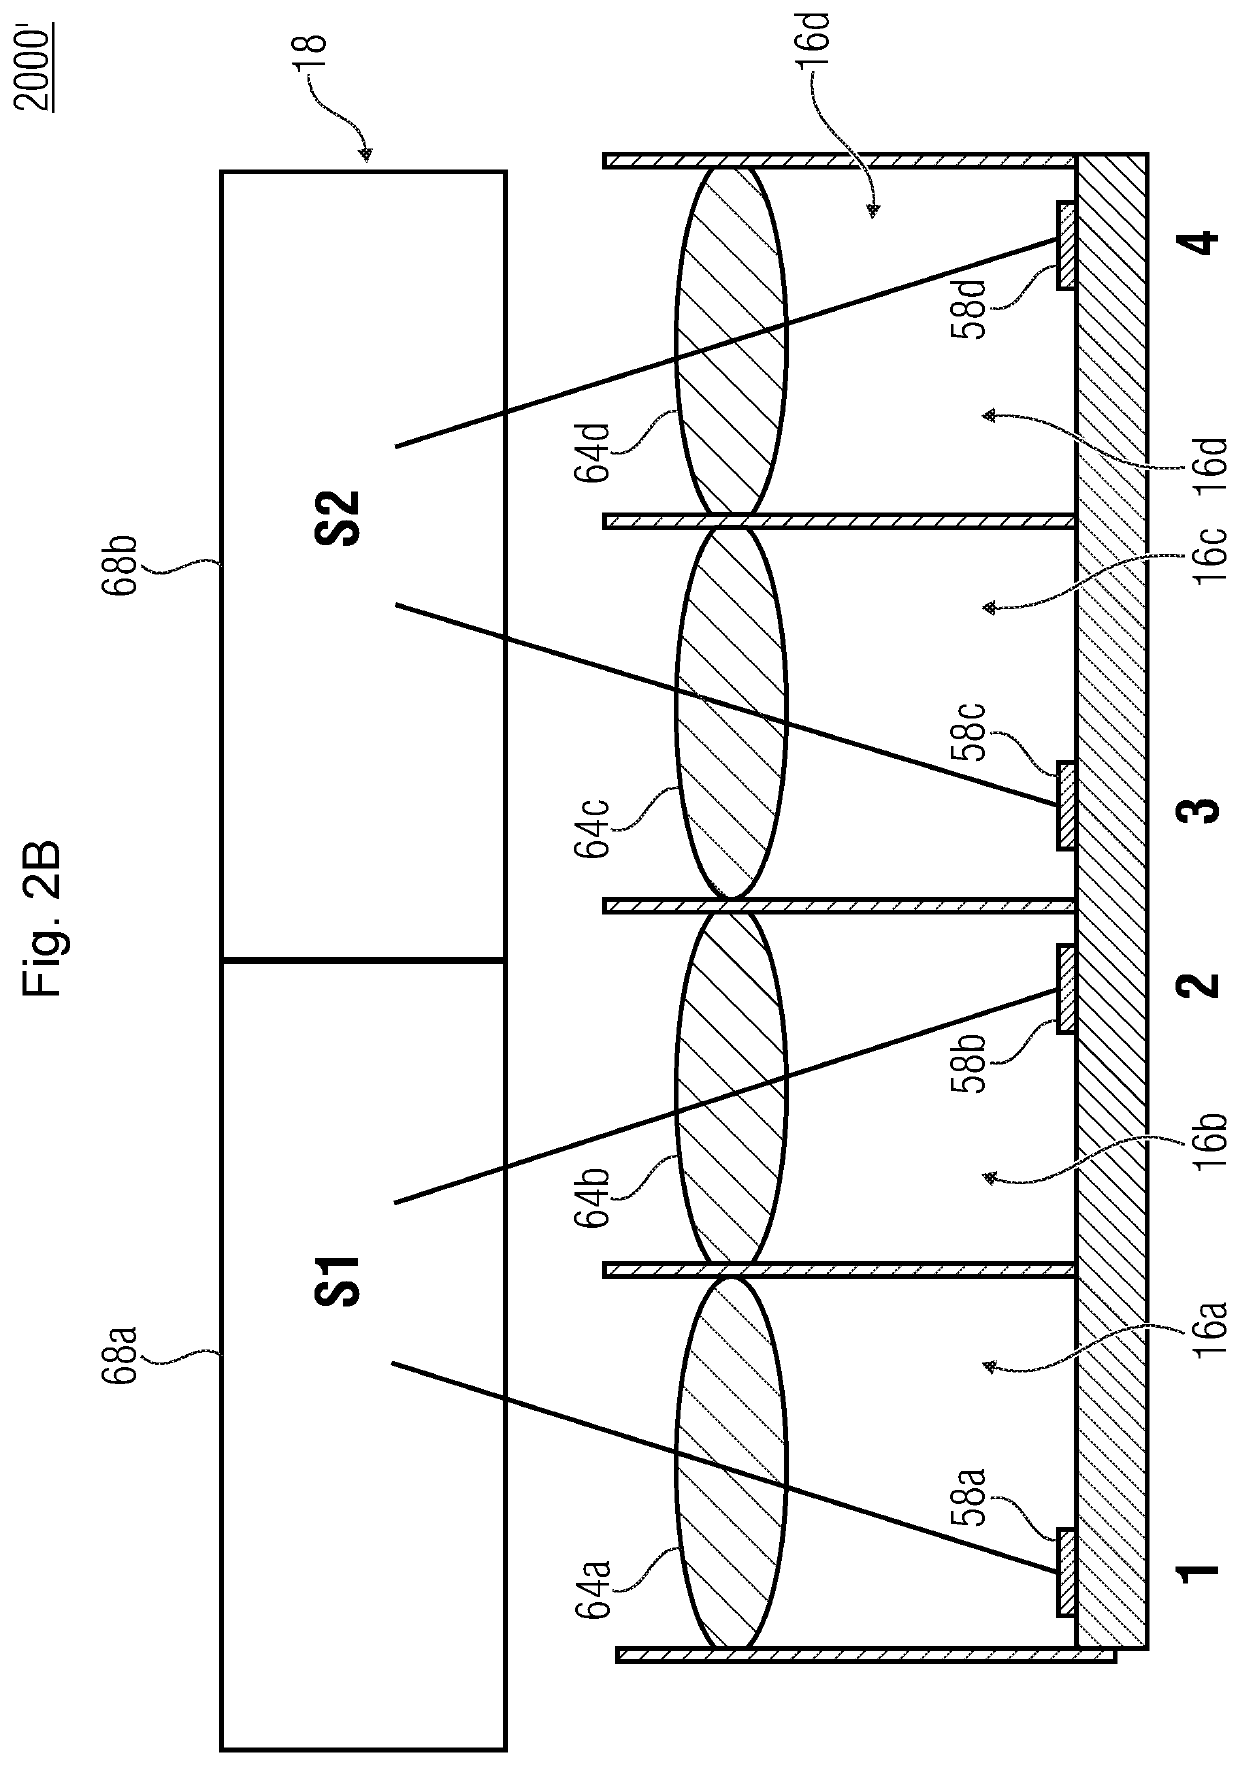 Multi-aperture imaging device, imaging system and method for capturing an object area